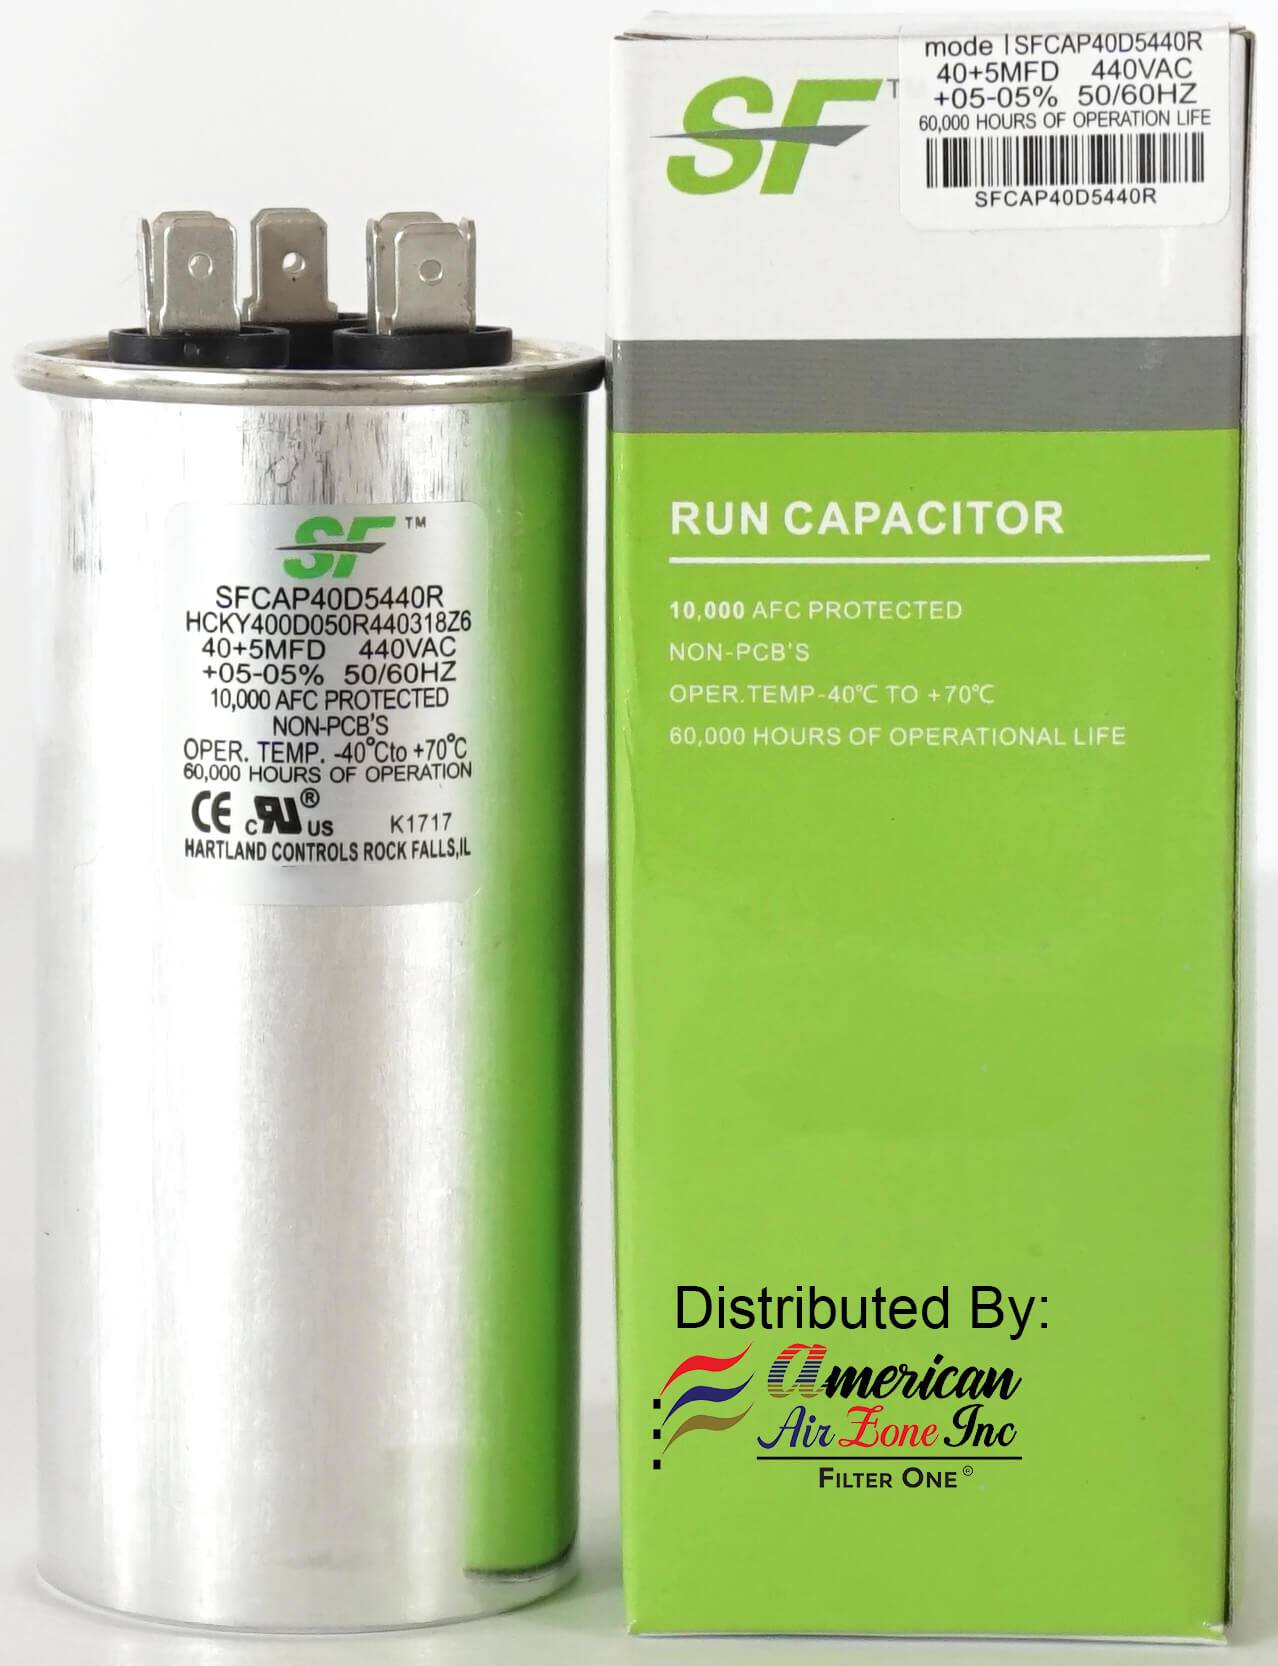 Replaces other Brands Capacitors Run Capacitor 370/440 Volts TRANE SF 3 MFD 2-Pack Fans or AC Compressors Oval for Motors MicroFarad 